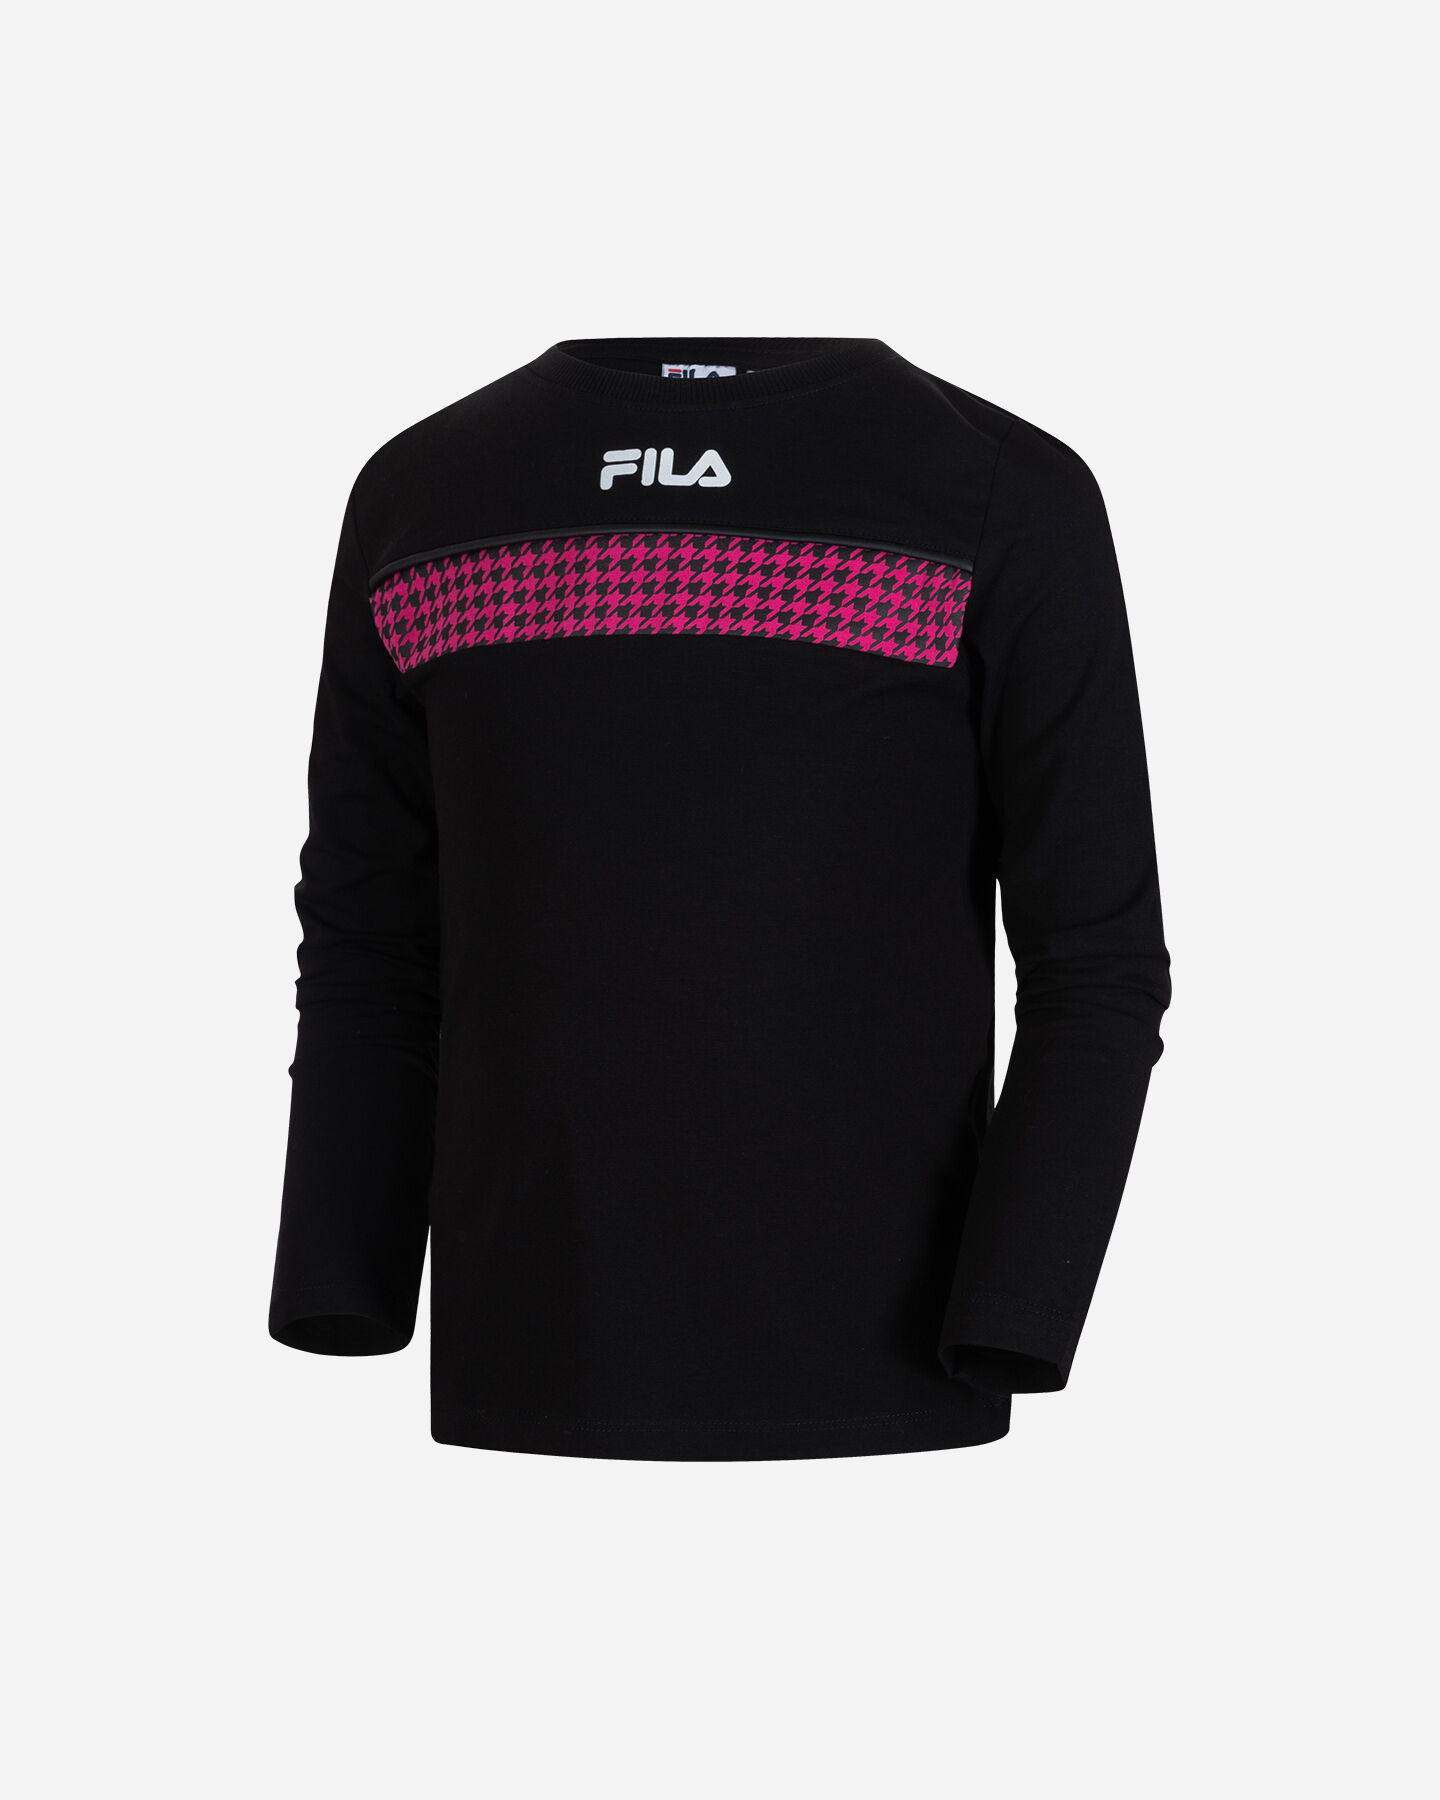  T-Shirt FILA GLAM ROCK COLLECTION JR S4125399|050|8A scatto 0